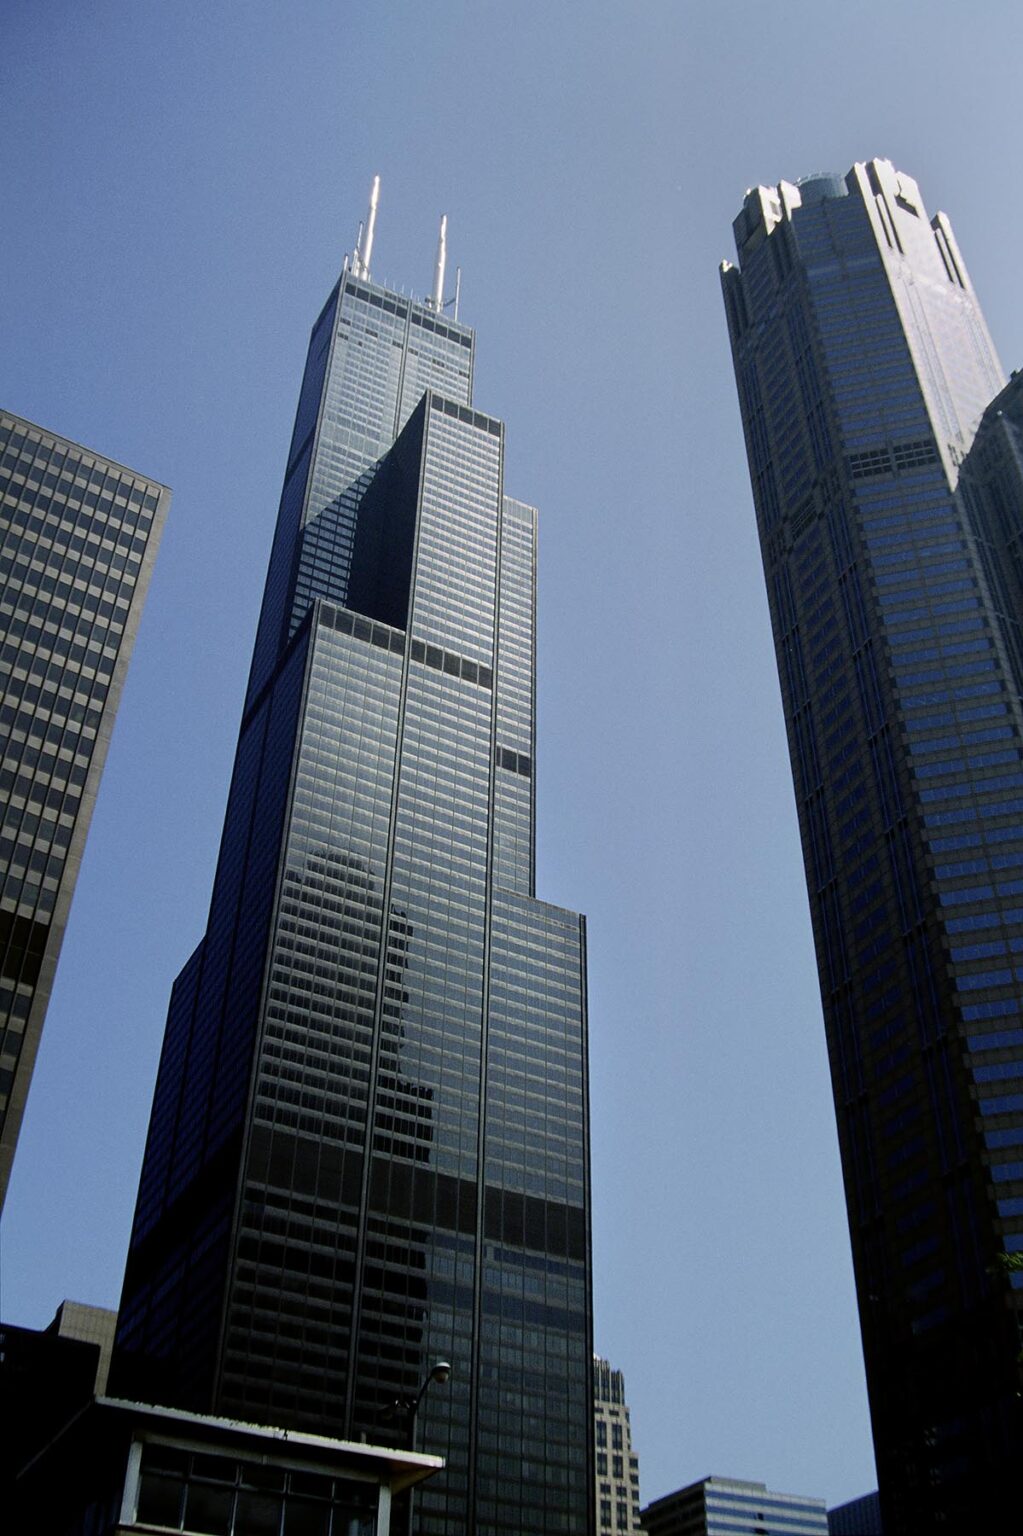 The SEARS TOWER (1454 ft./world's tallest building for 24 years) designed by Skidmore, Owings and Merrill 1974 - CHICAGO, ILLINOIS